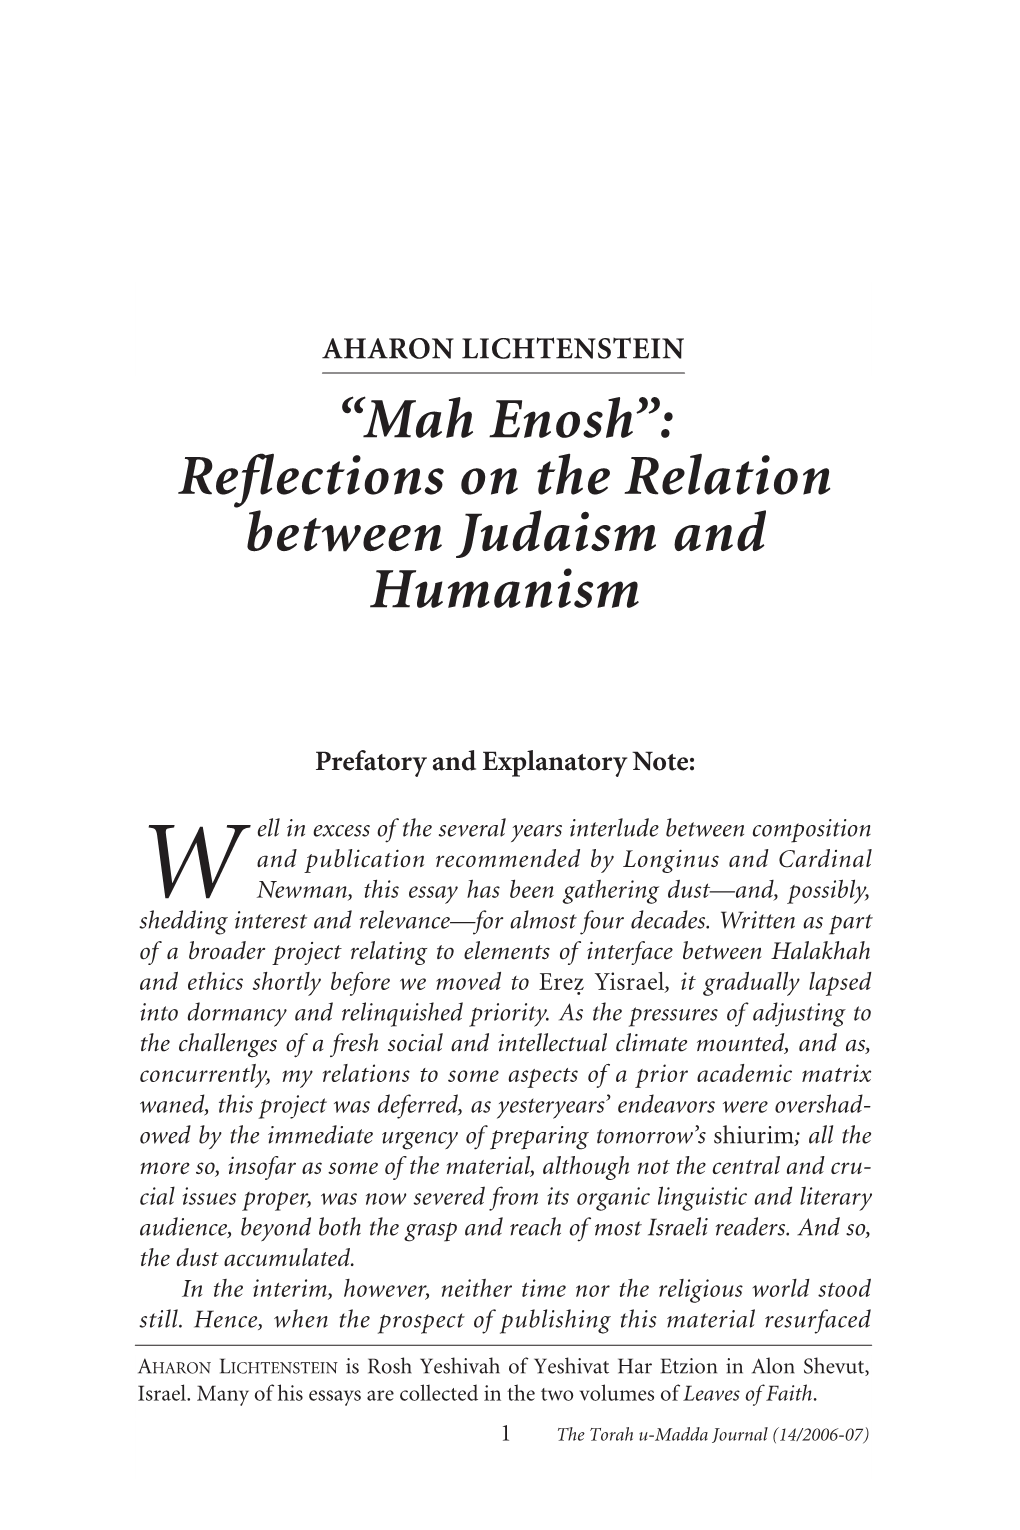 Mah Enosh”: Reflections on the Relation Between Judaism and Humanism